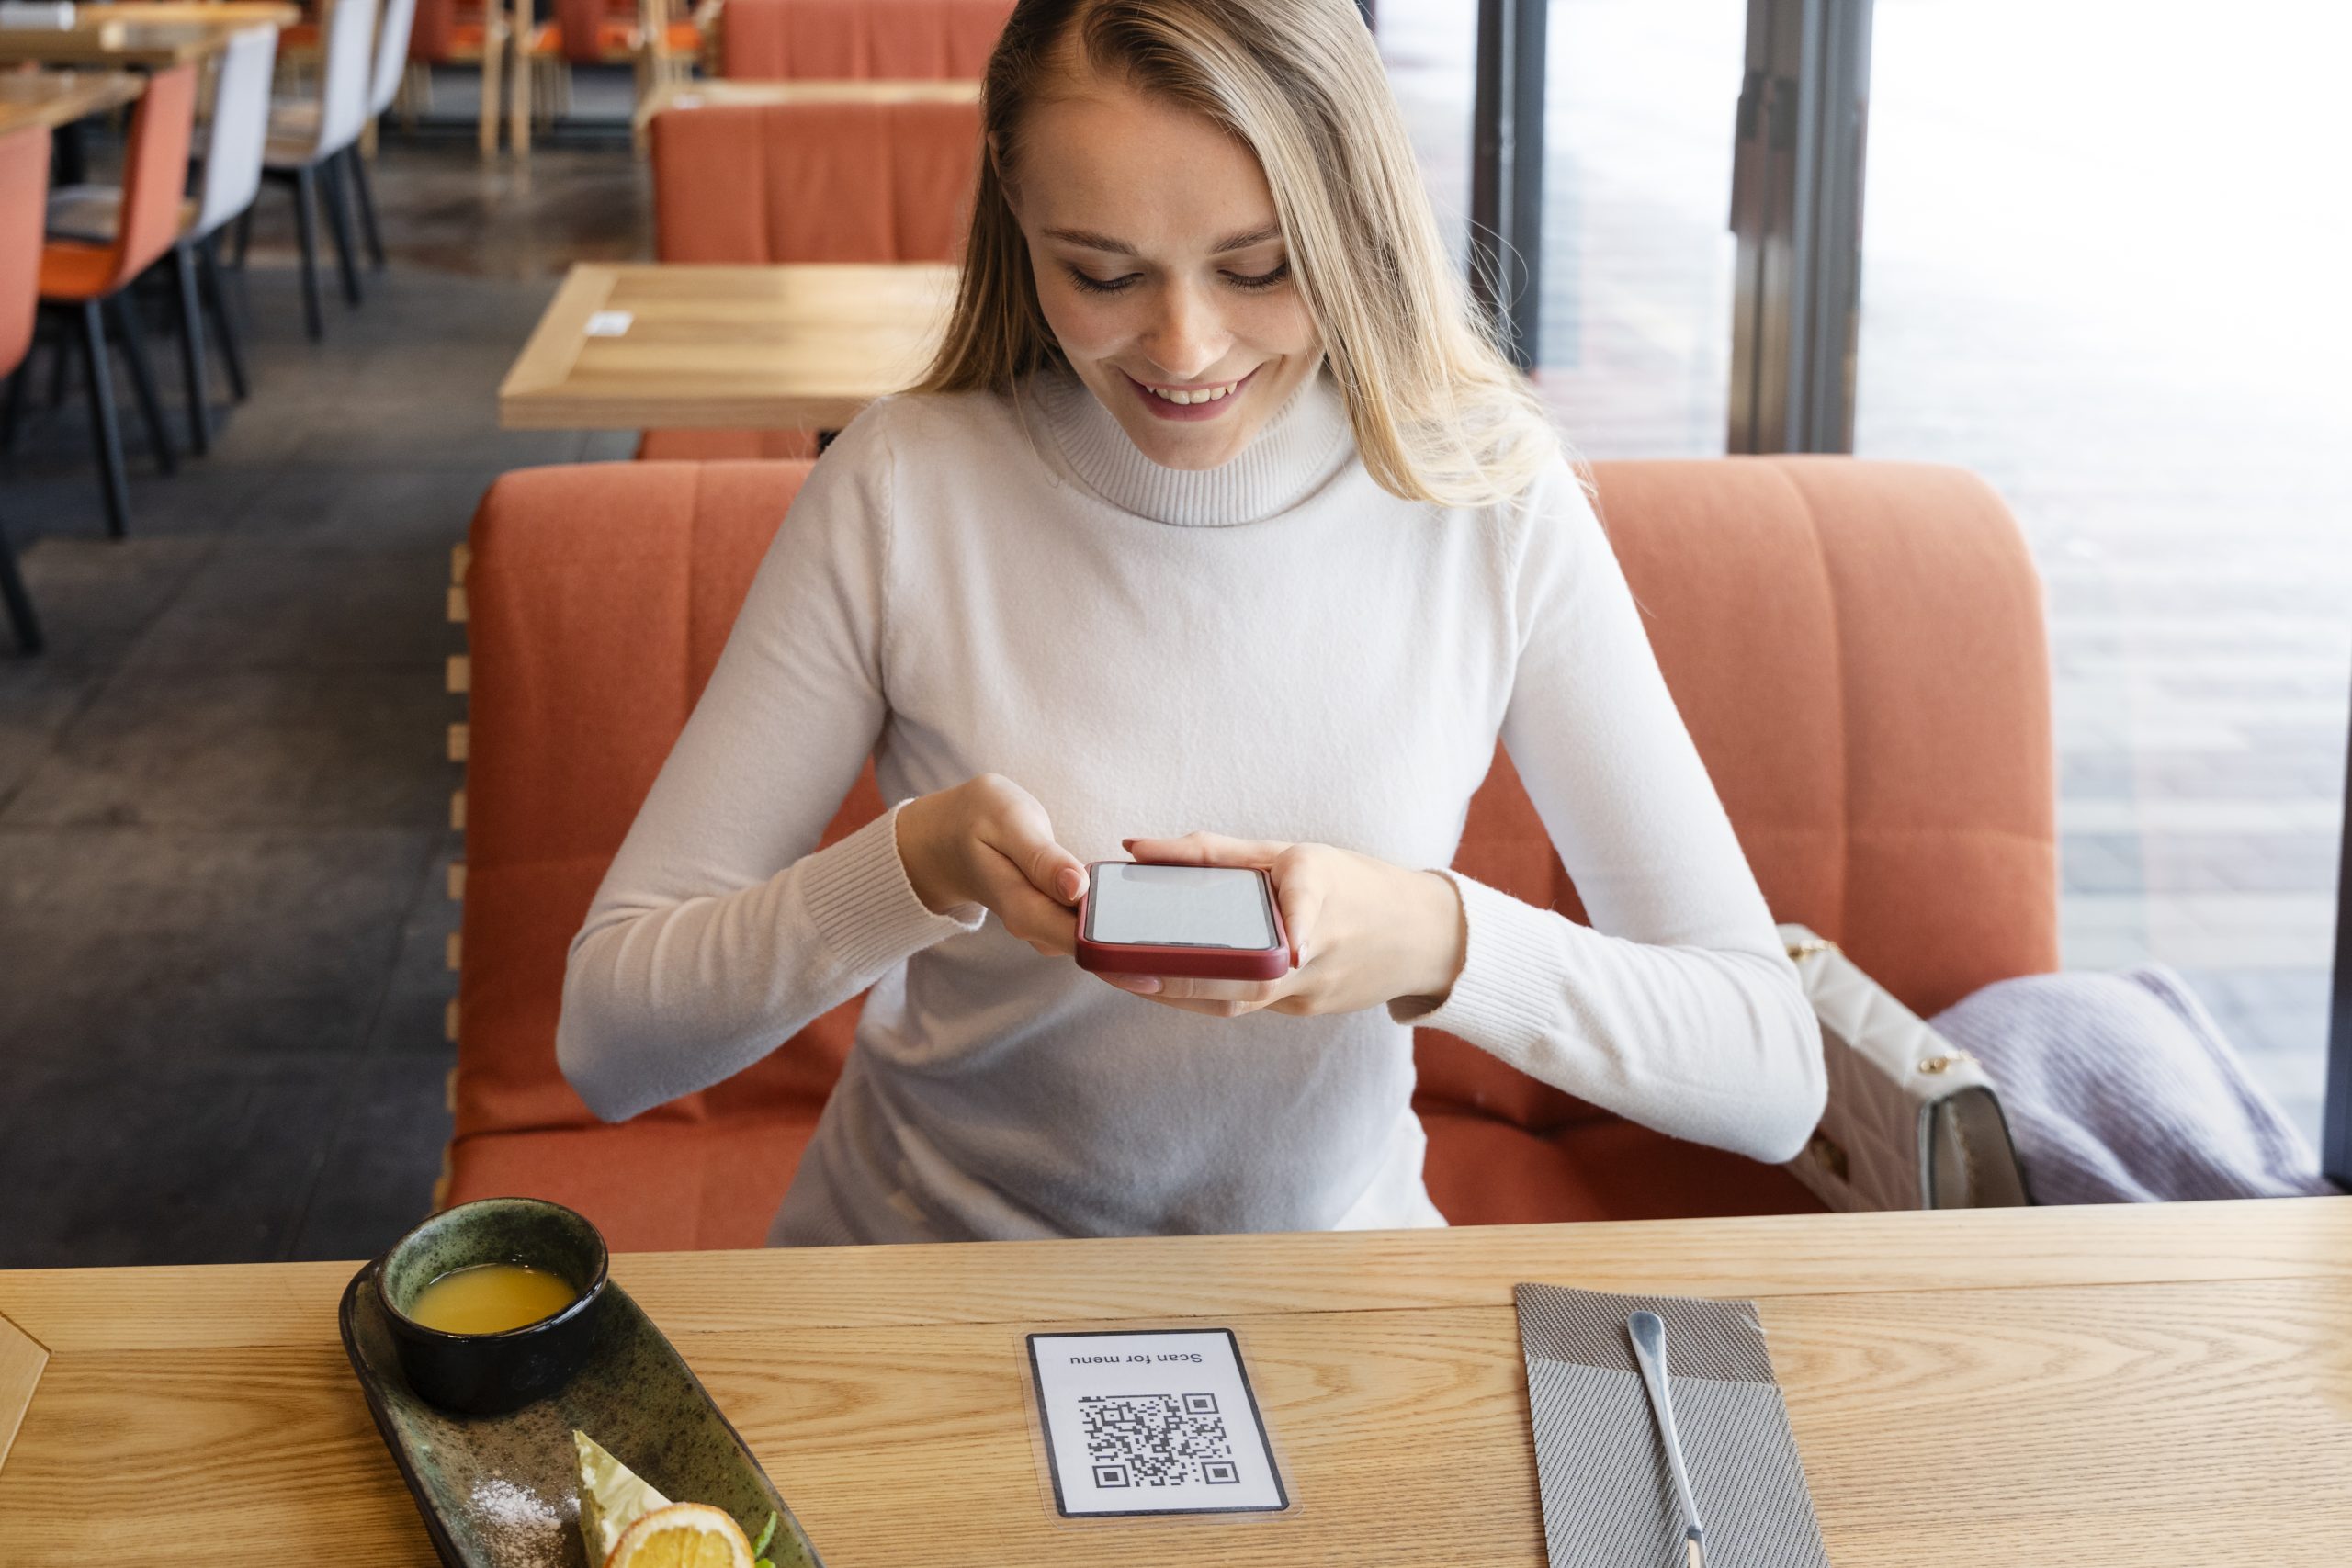 Someone scanning a QR code at a restaurant